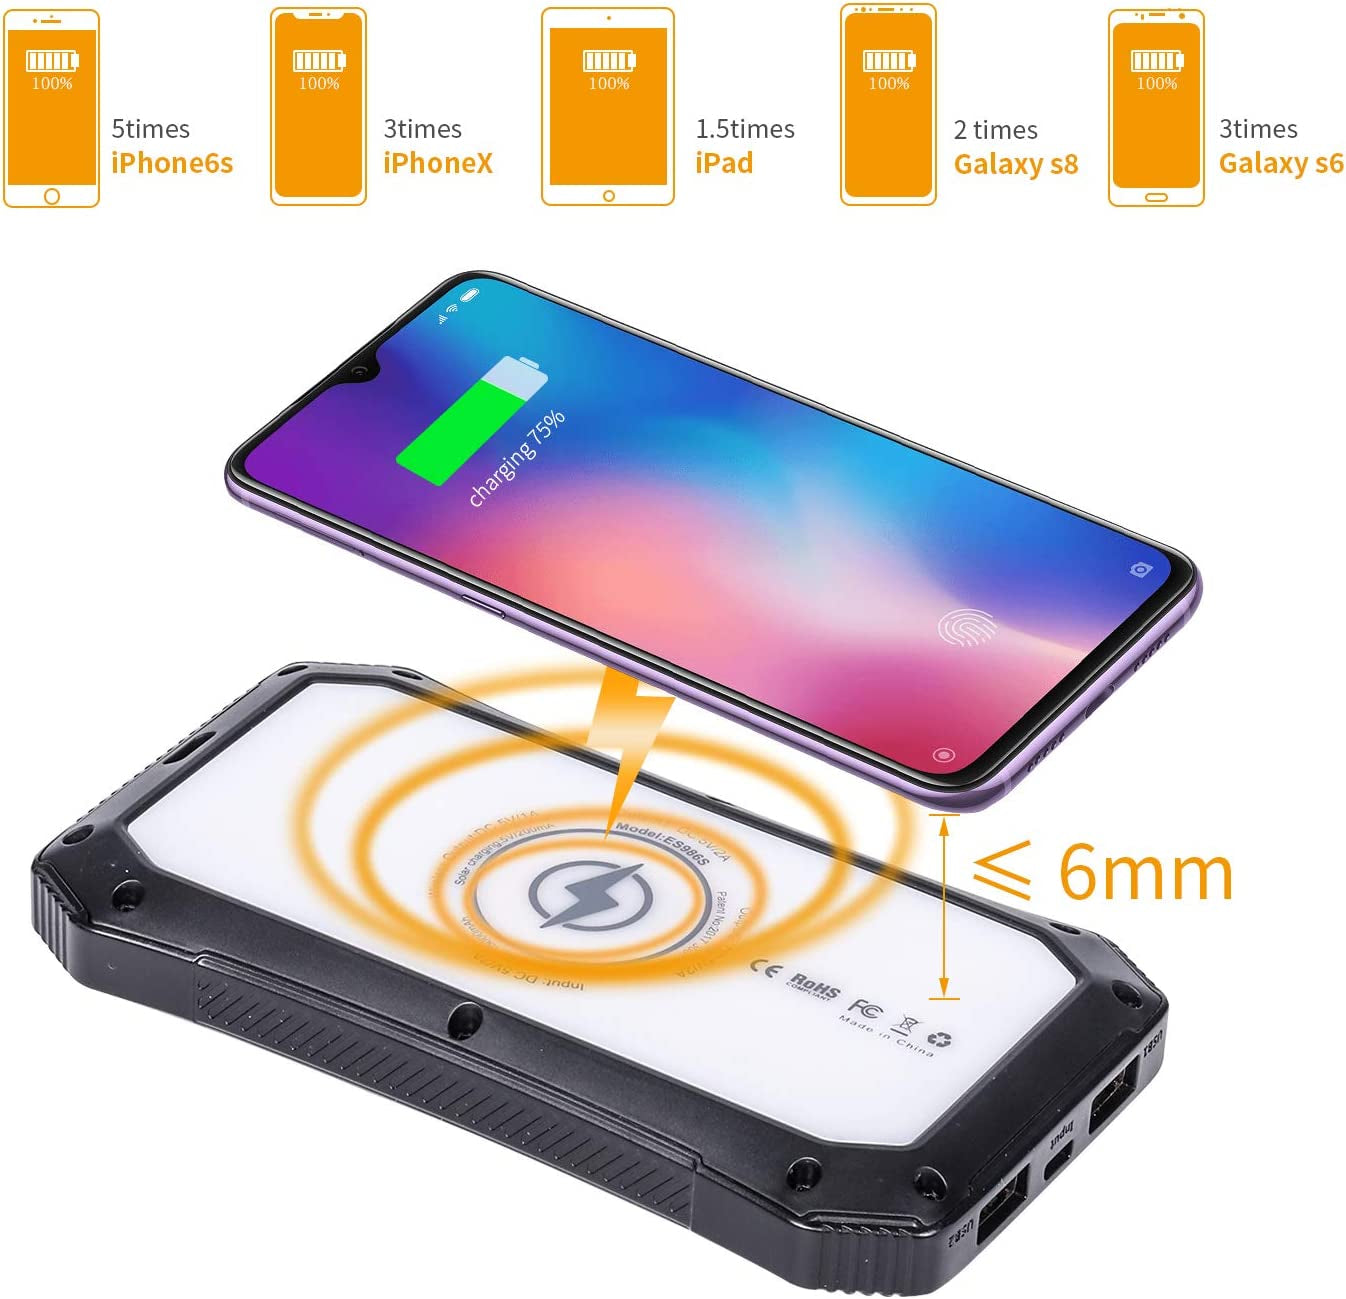 Solar Power Bank, Wireless 15000Mah Portable Charger External Battery Pack Qi Solar Phone Charger with 20 LED Flashlights and Dual USB Outputs Compatible with Iphone, Ipad, Samsung and More